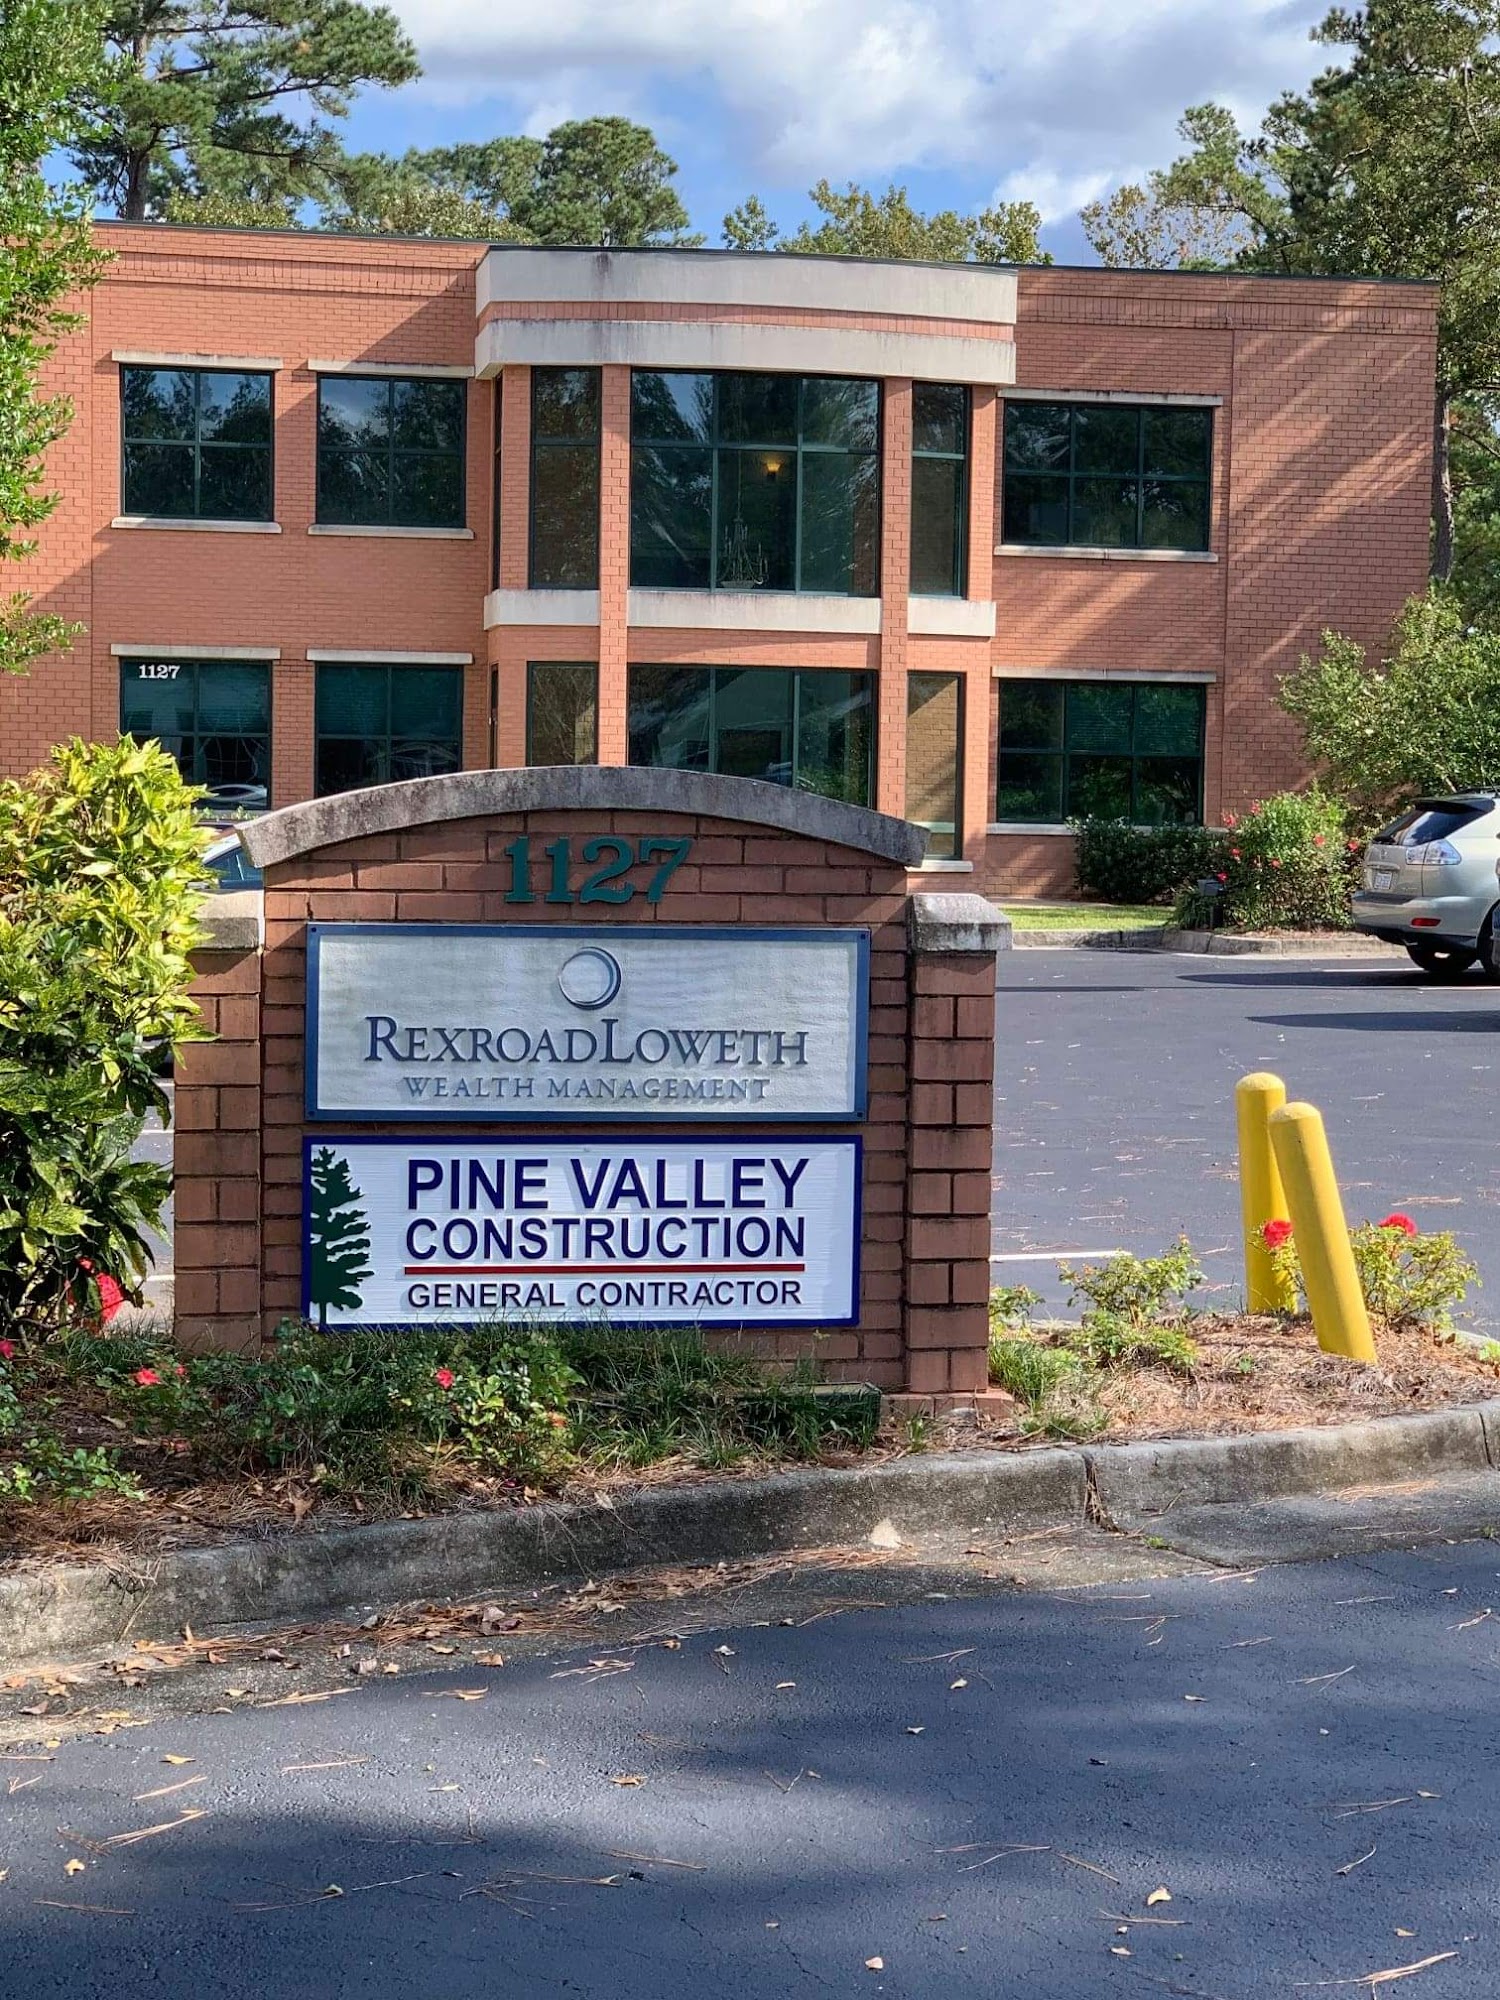 Pine Valley Construction Co